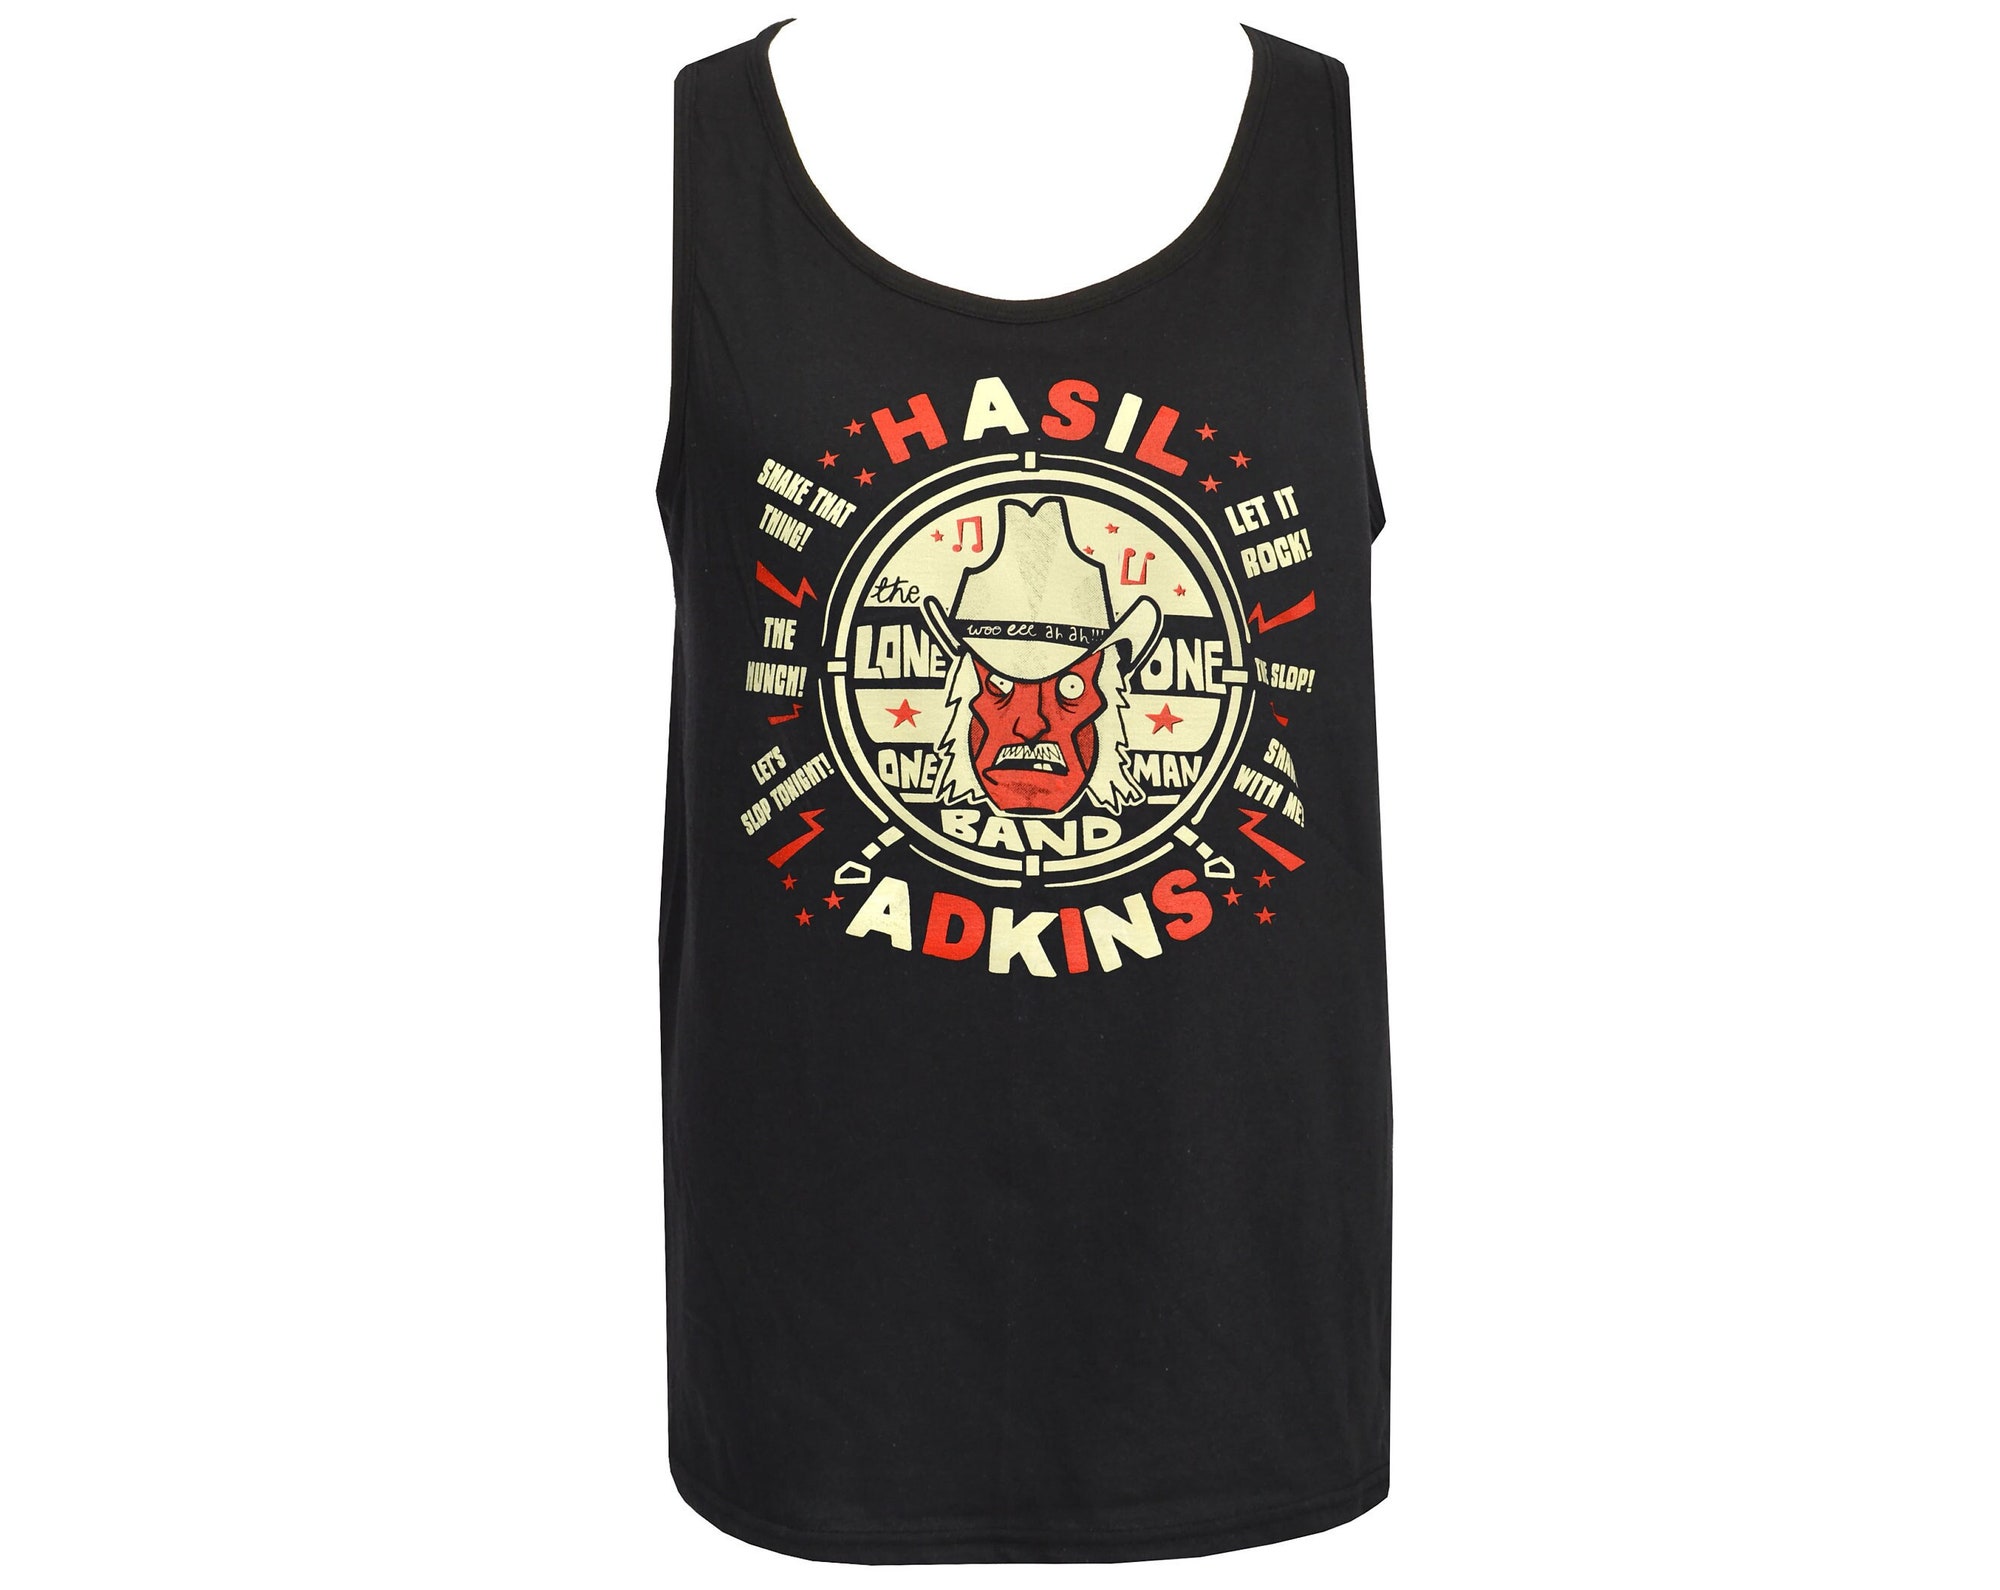 Discover Hasil Adkins Mens Tank Top Rock & Roll Country Blues One Man Band